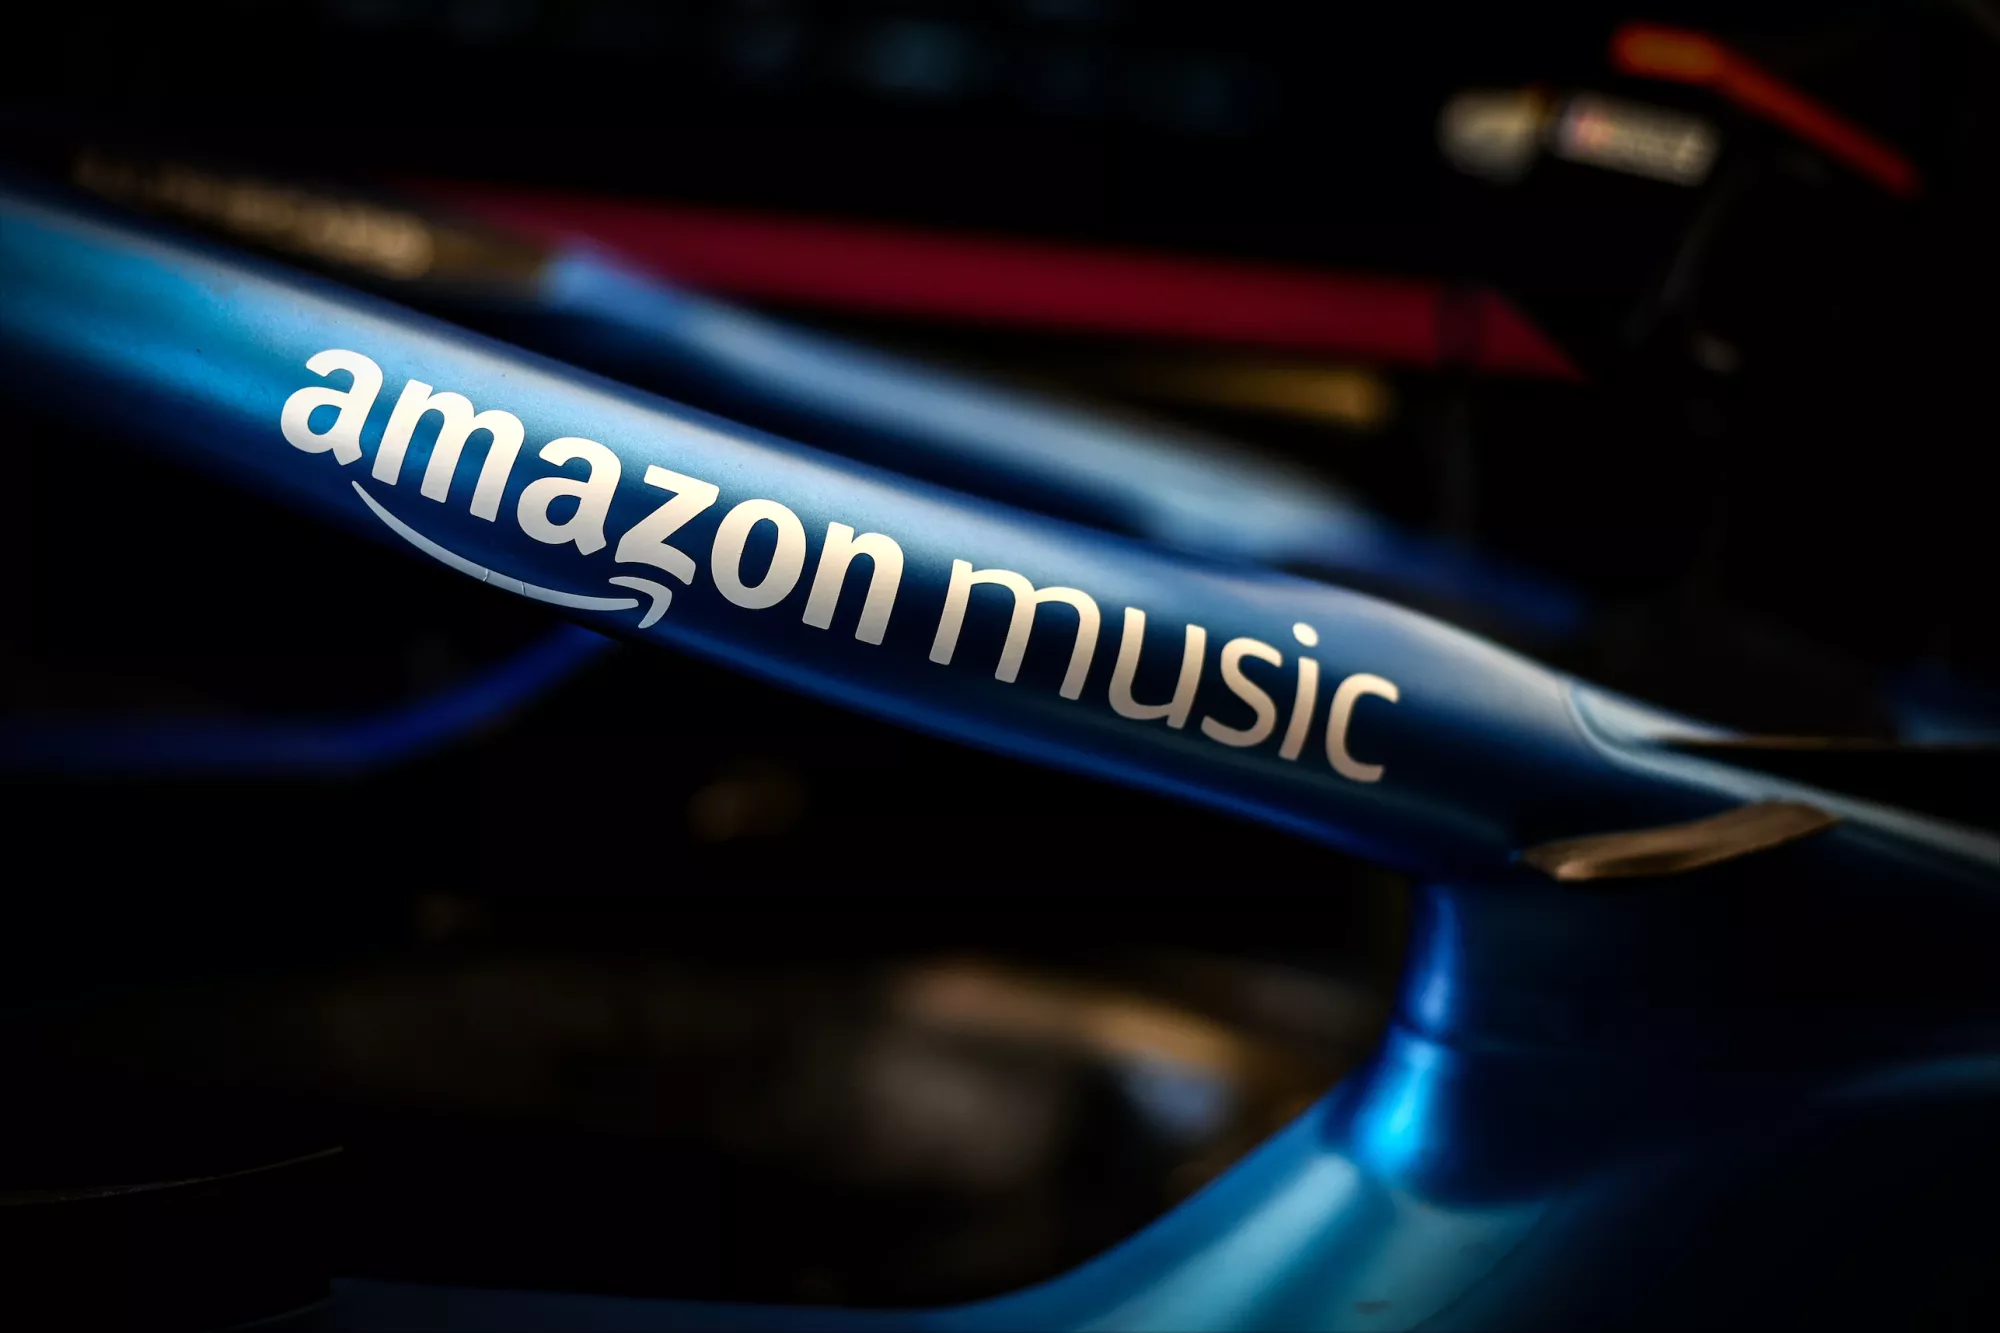 Amazon Music Announced as the Official Music Streaming Sponsor of BWT Alpine F1 Team